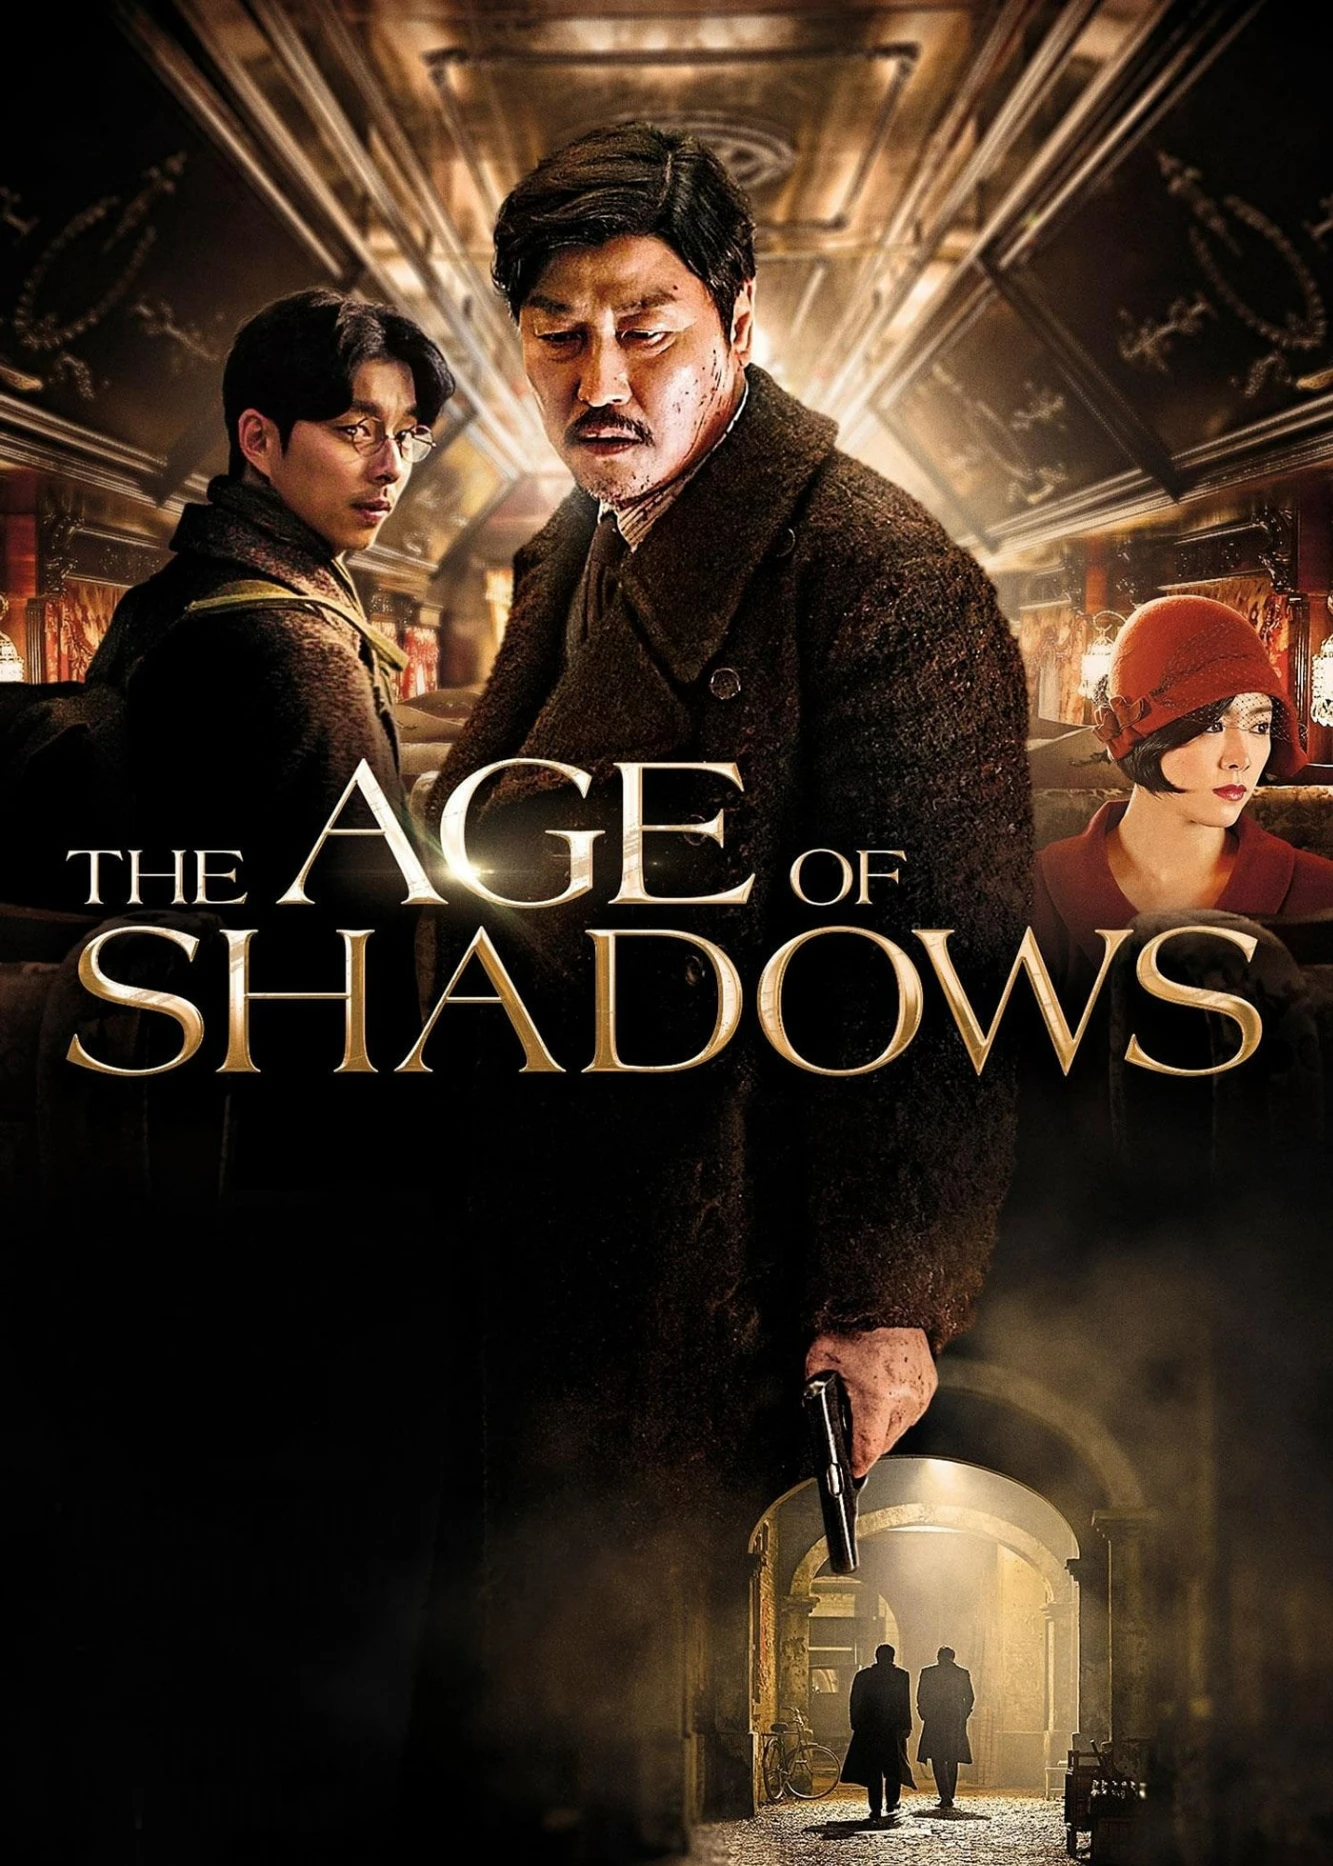 The Age of Shadows | The Age of Shadows (2016)